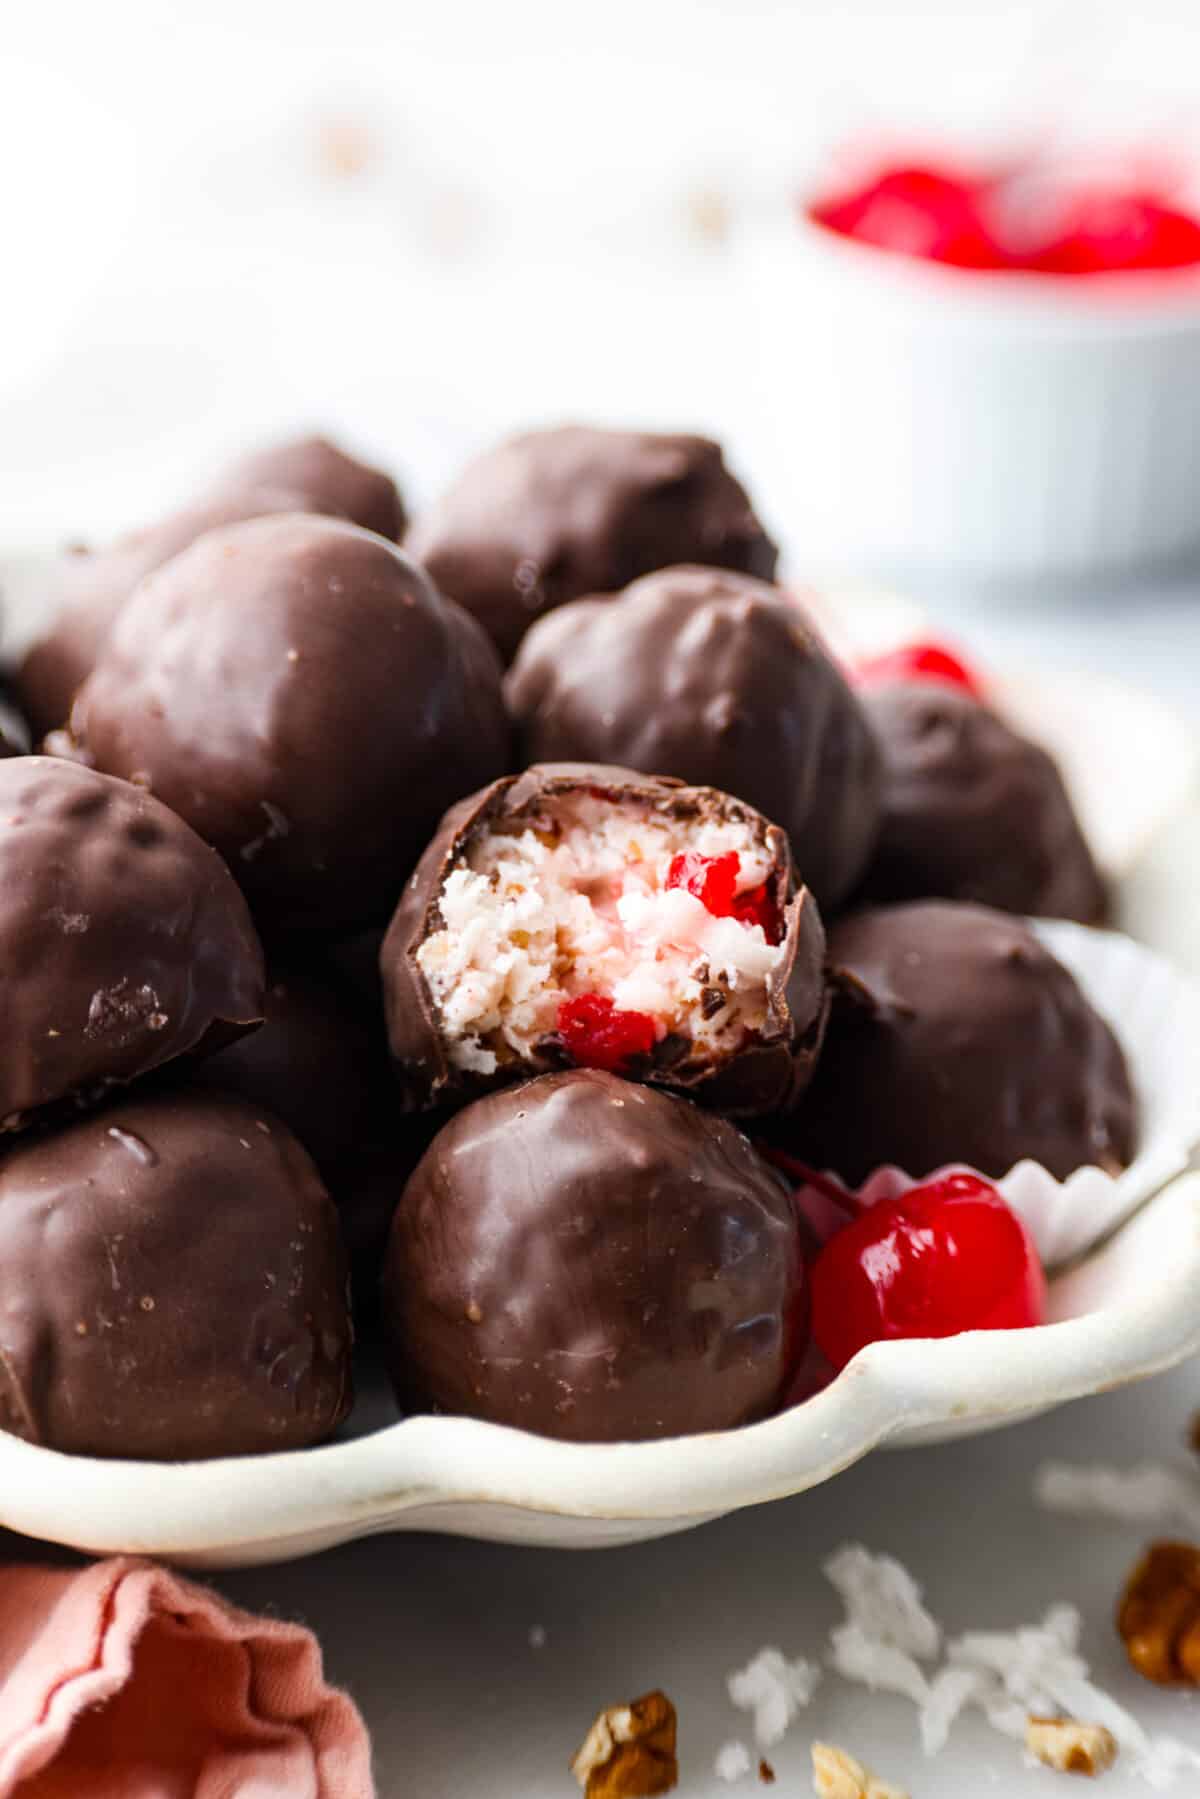 Chocolate-coated cherry truffles in a white scalloped serving dish.